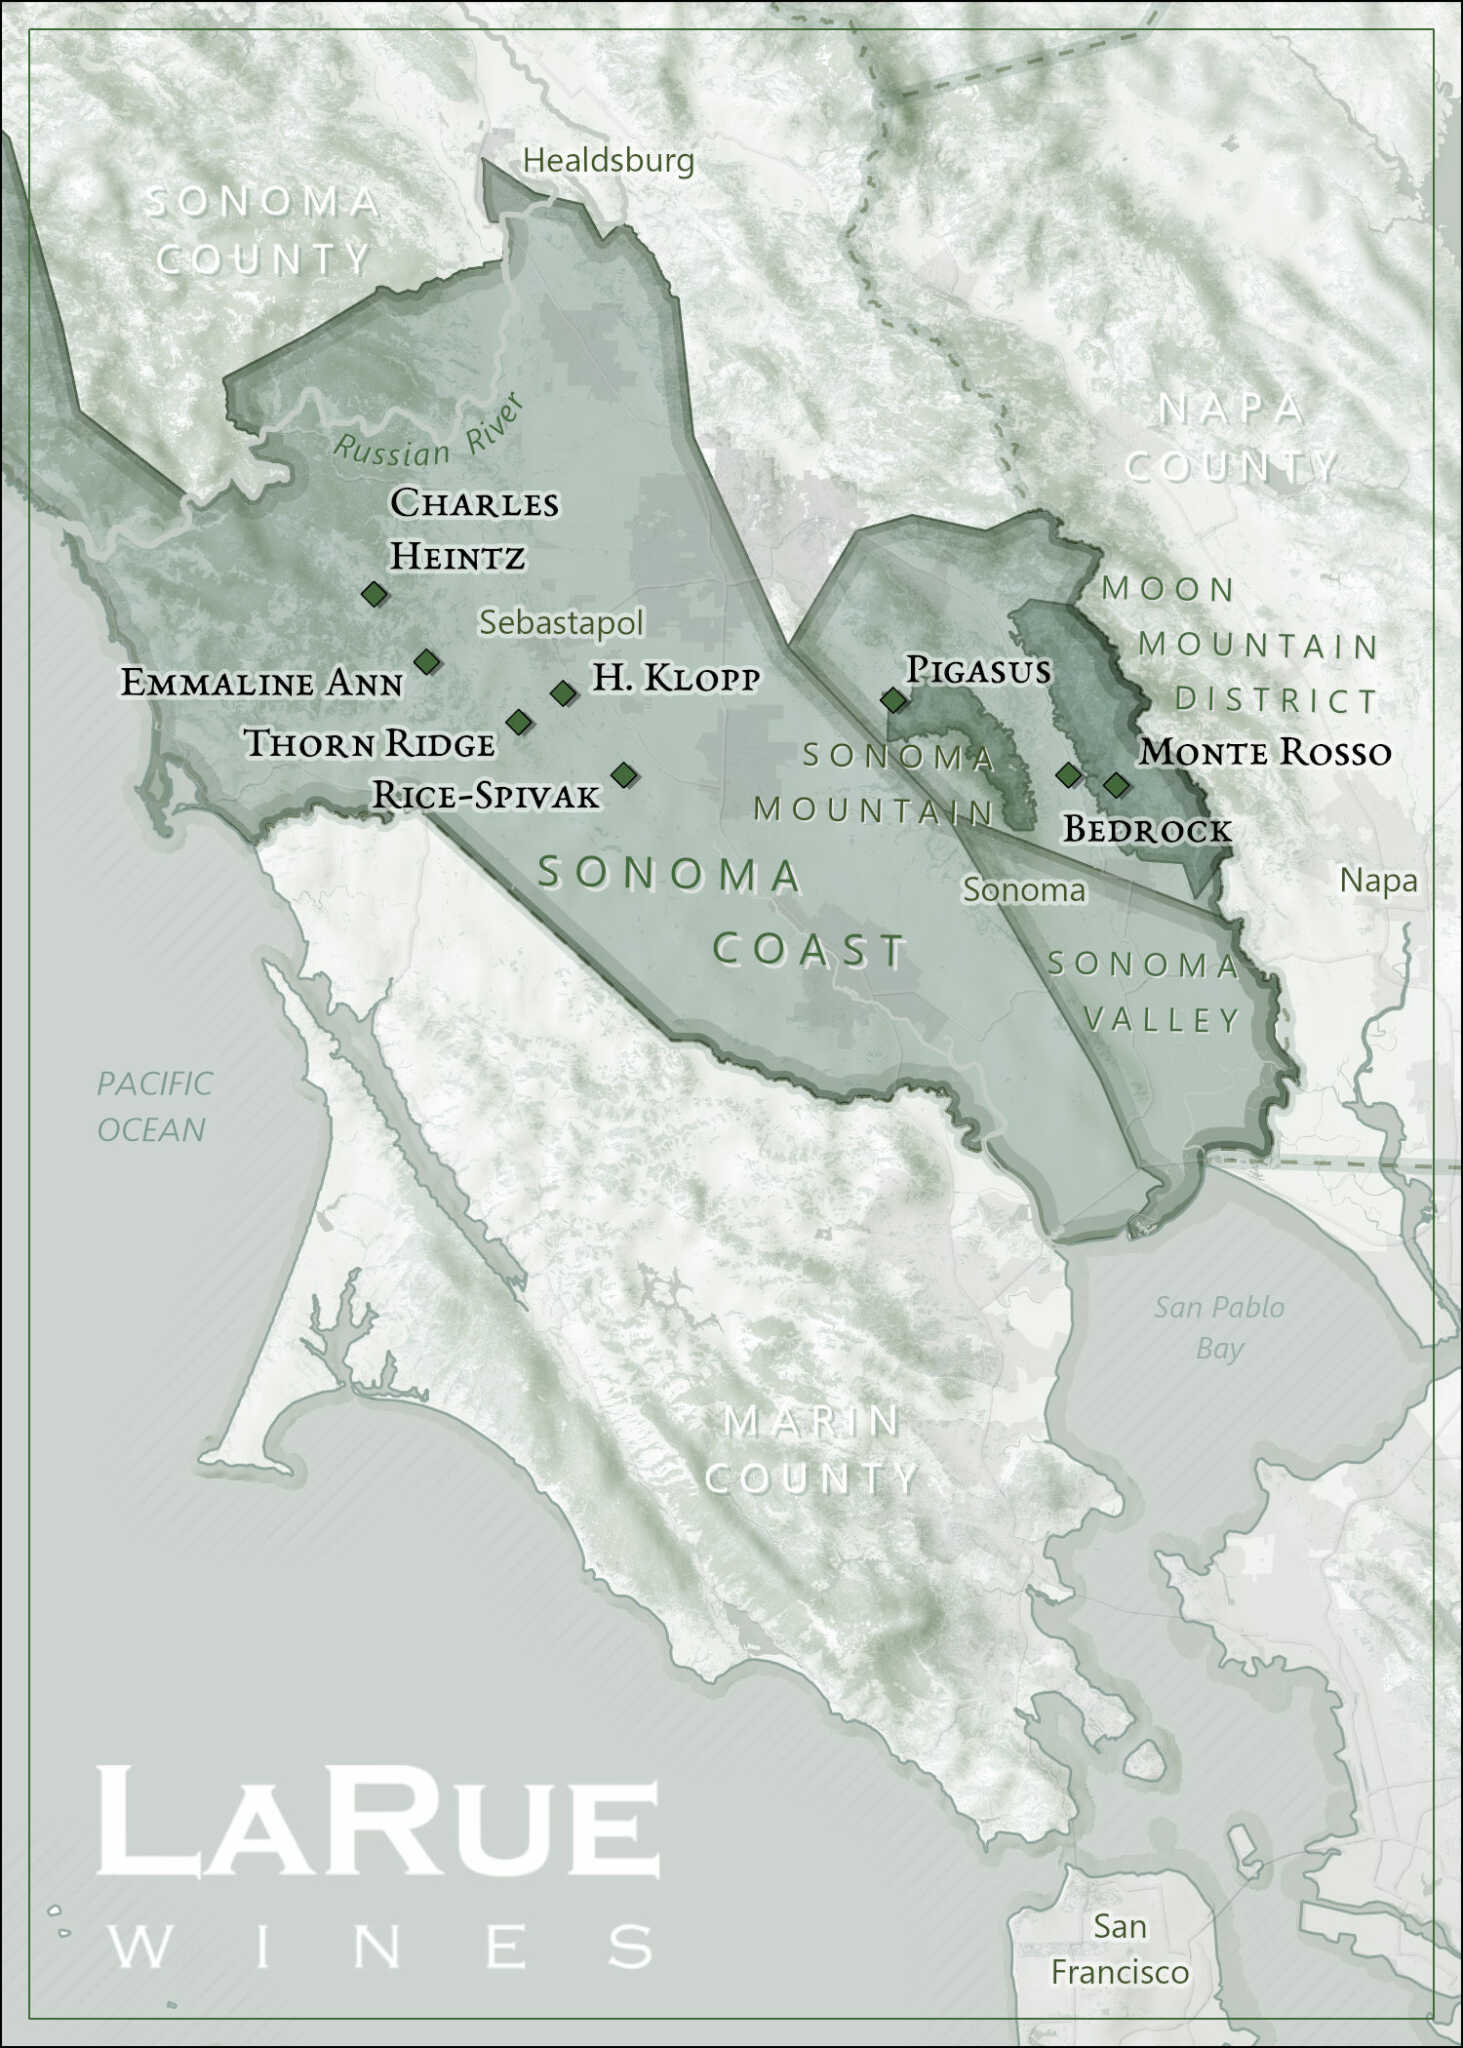 Map of Sonoma County, CA, highlighting various wine regions and vineyards including Sonoma Coast, Moon Mountain District, Sonoma Valley, and Russian River. LaRue Wines logo at the bottom left.